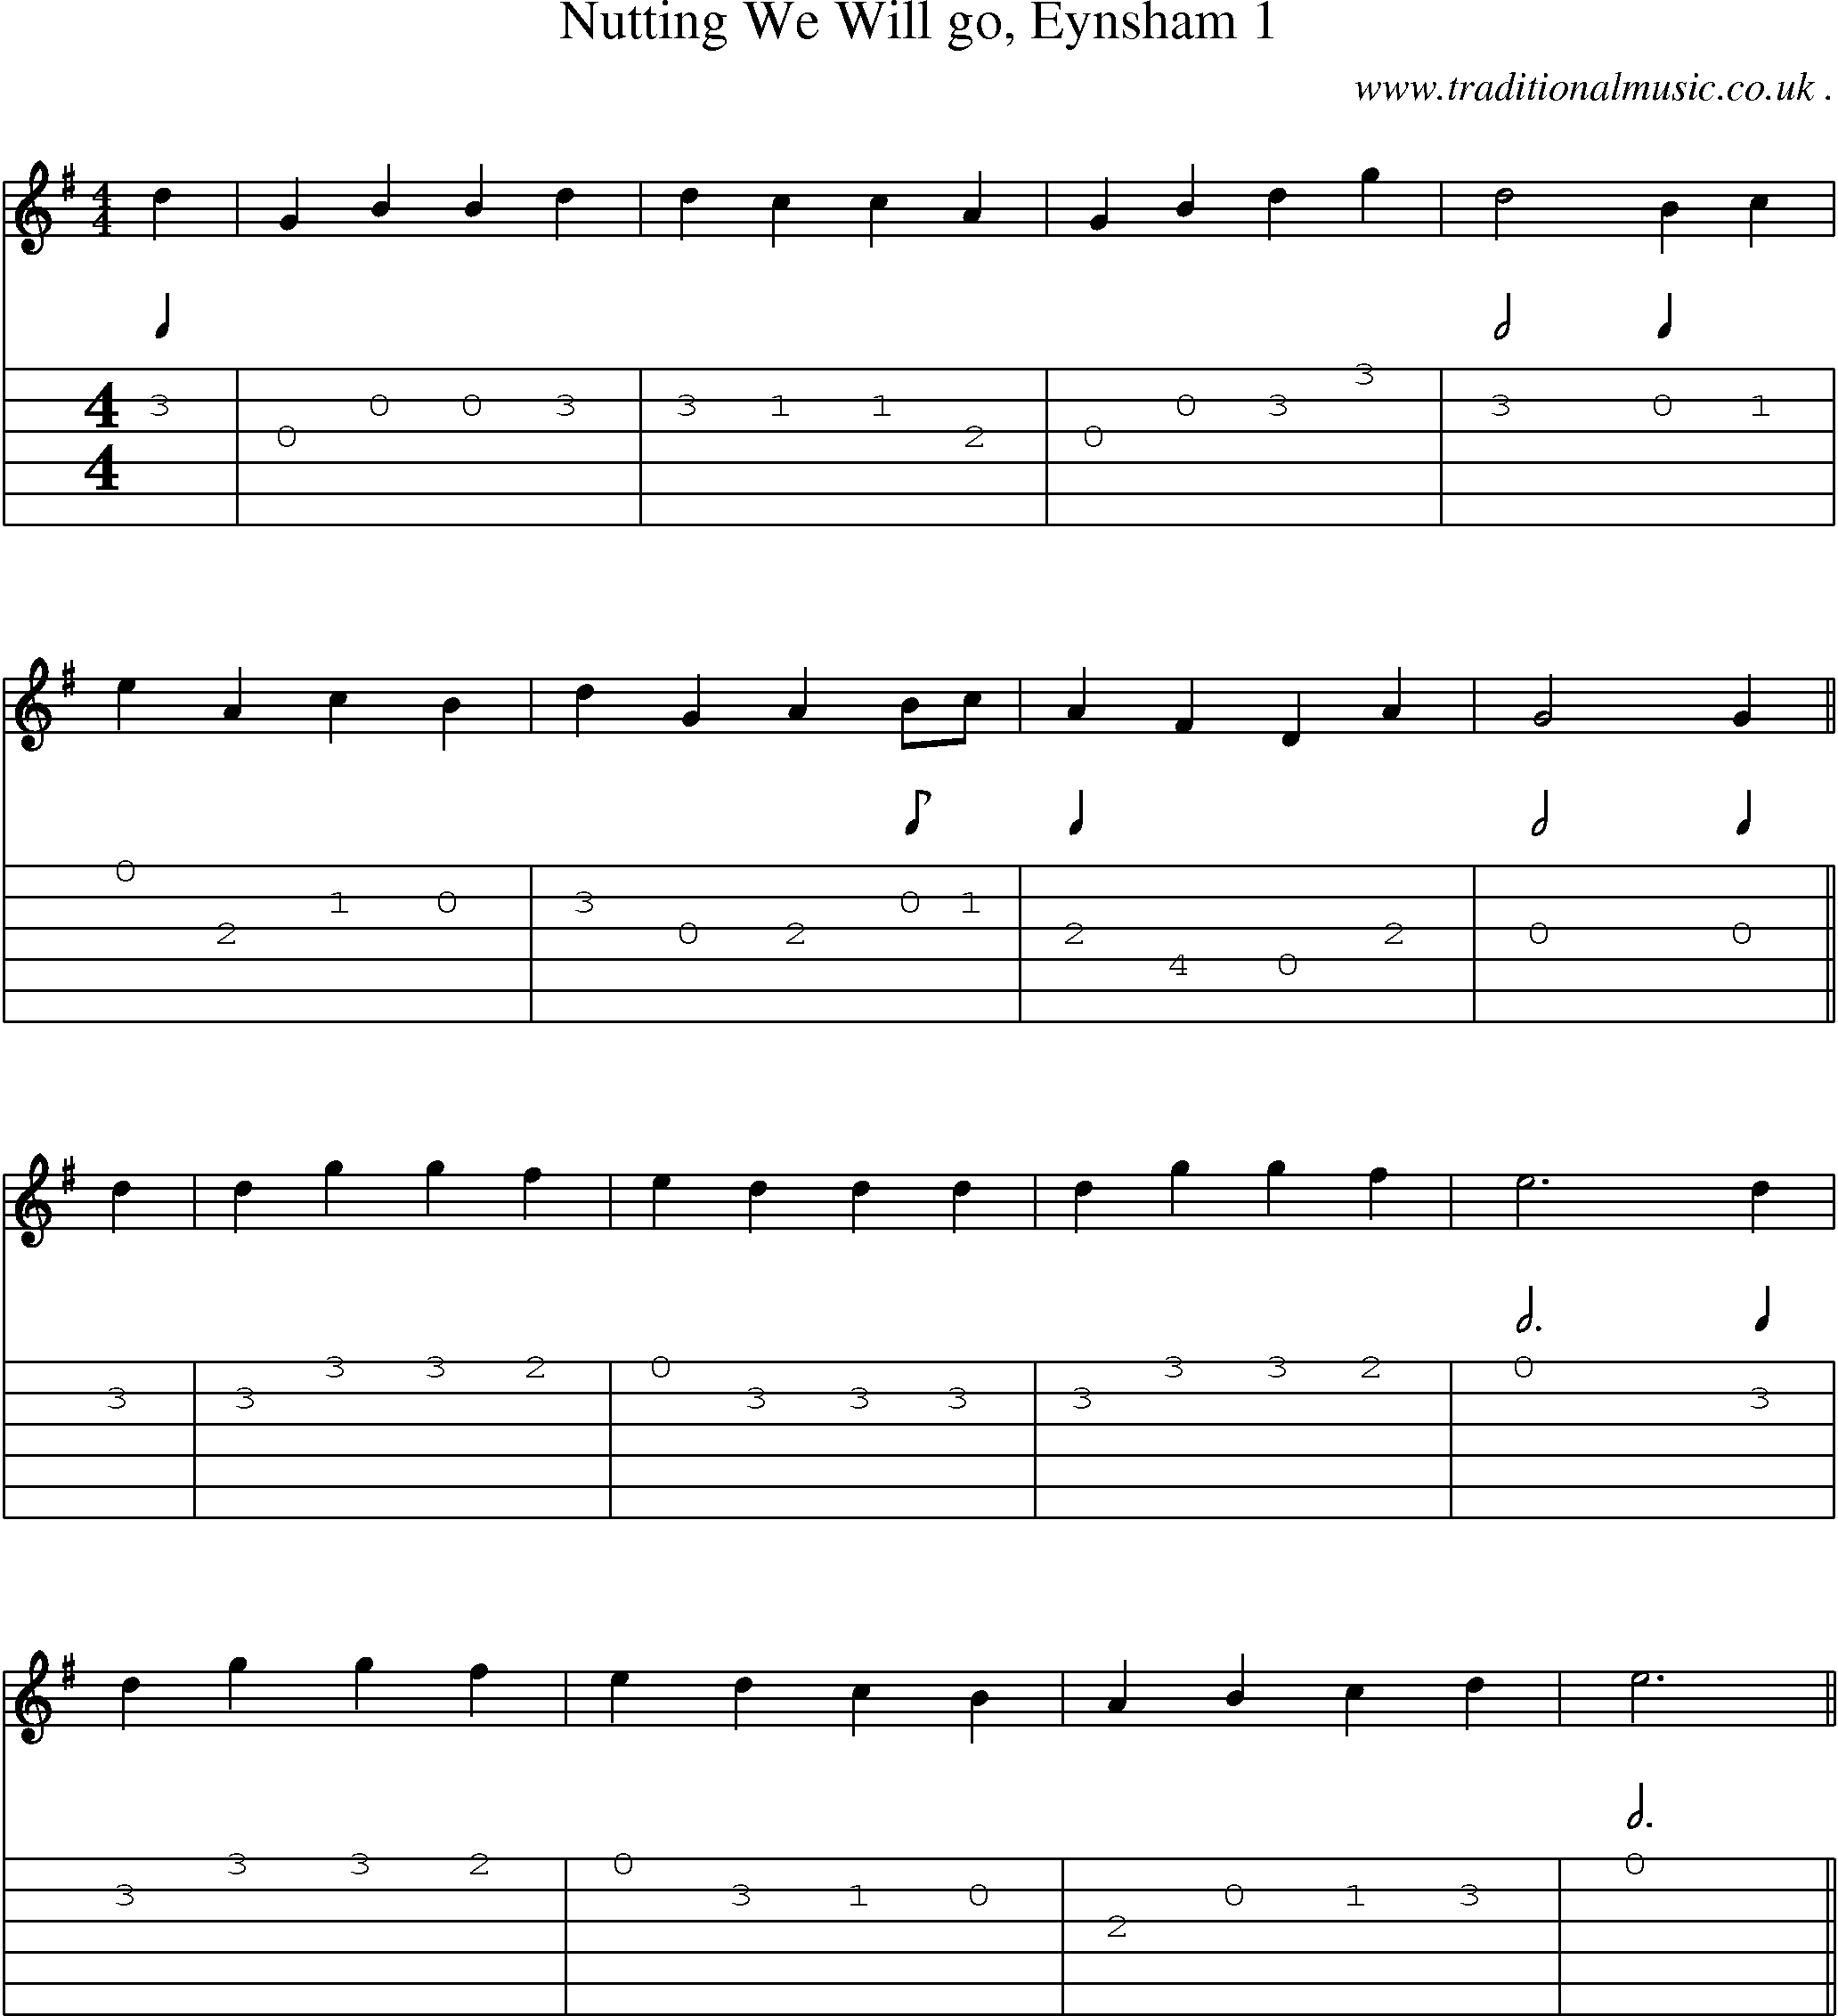 Sheet-Music and Guitar Tabs for Nutting We Will Go Eynsham 1